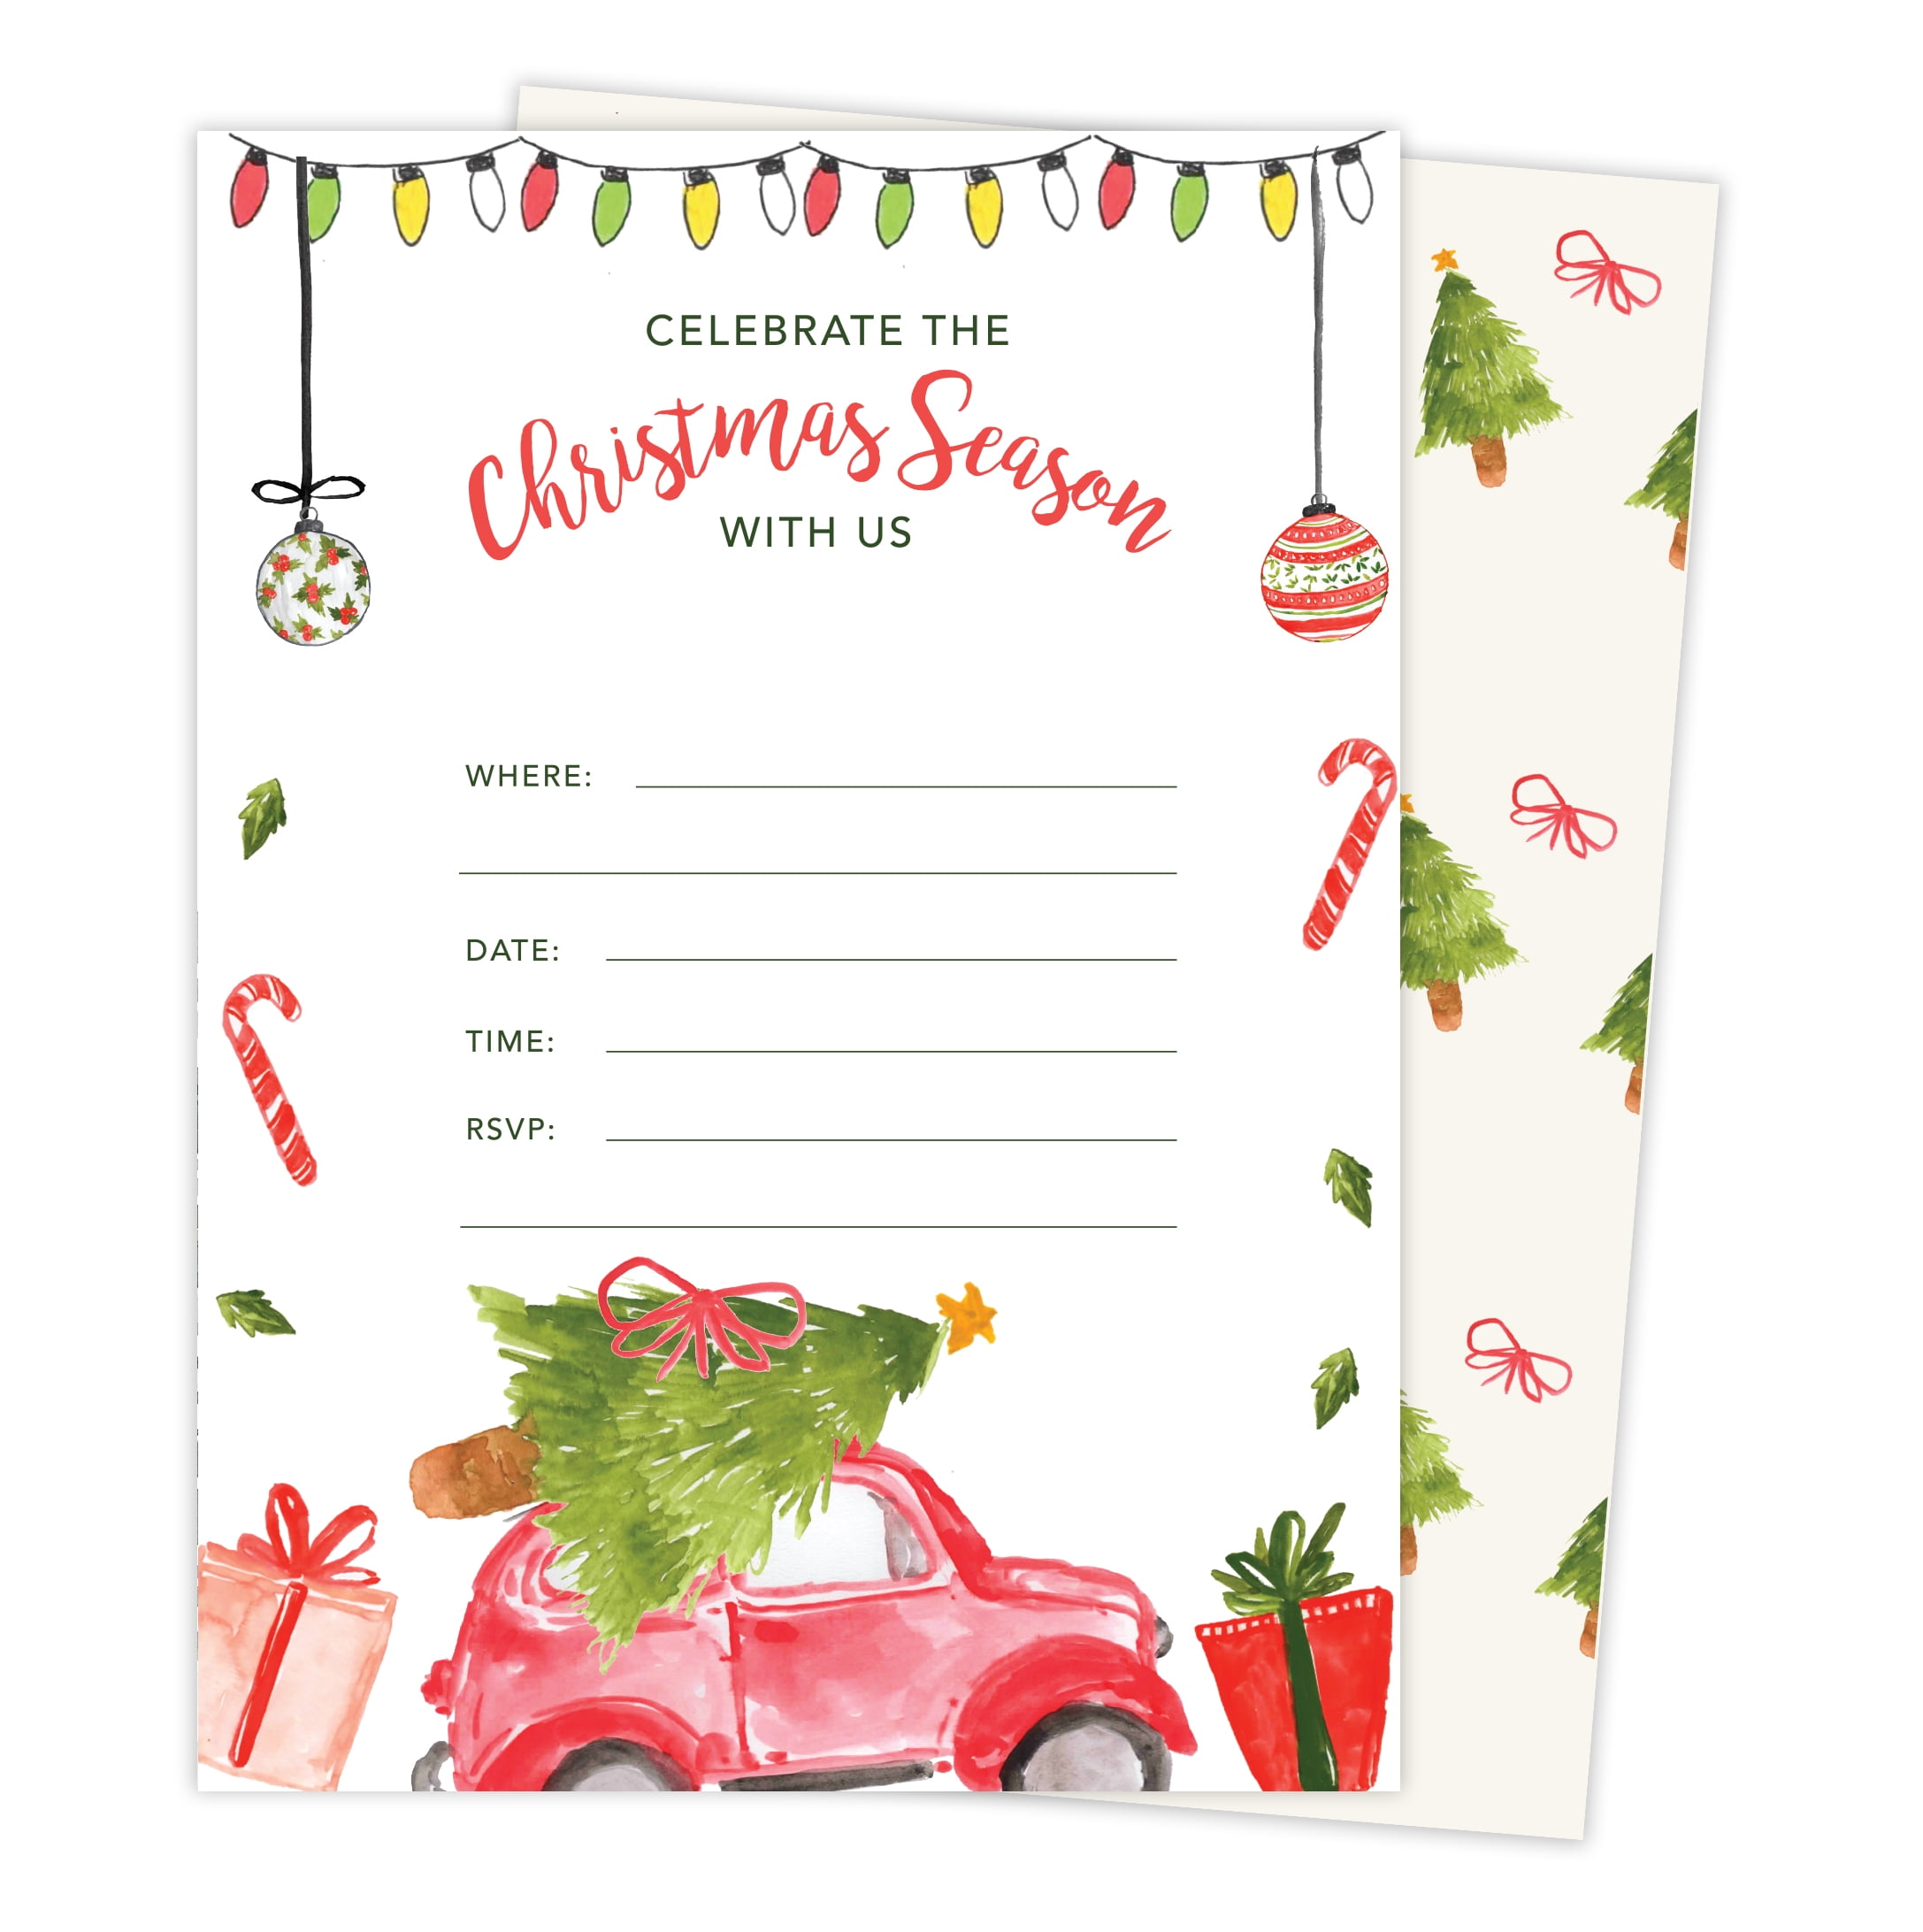 With Envelopes & Seal Stickers Vinyl Party 25ct 25 Count Christmas #2 Holiday Season Party Gathering Invitations Invite Cards